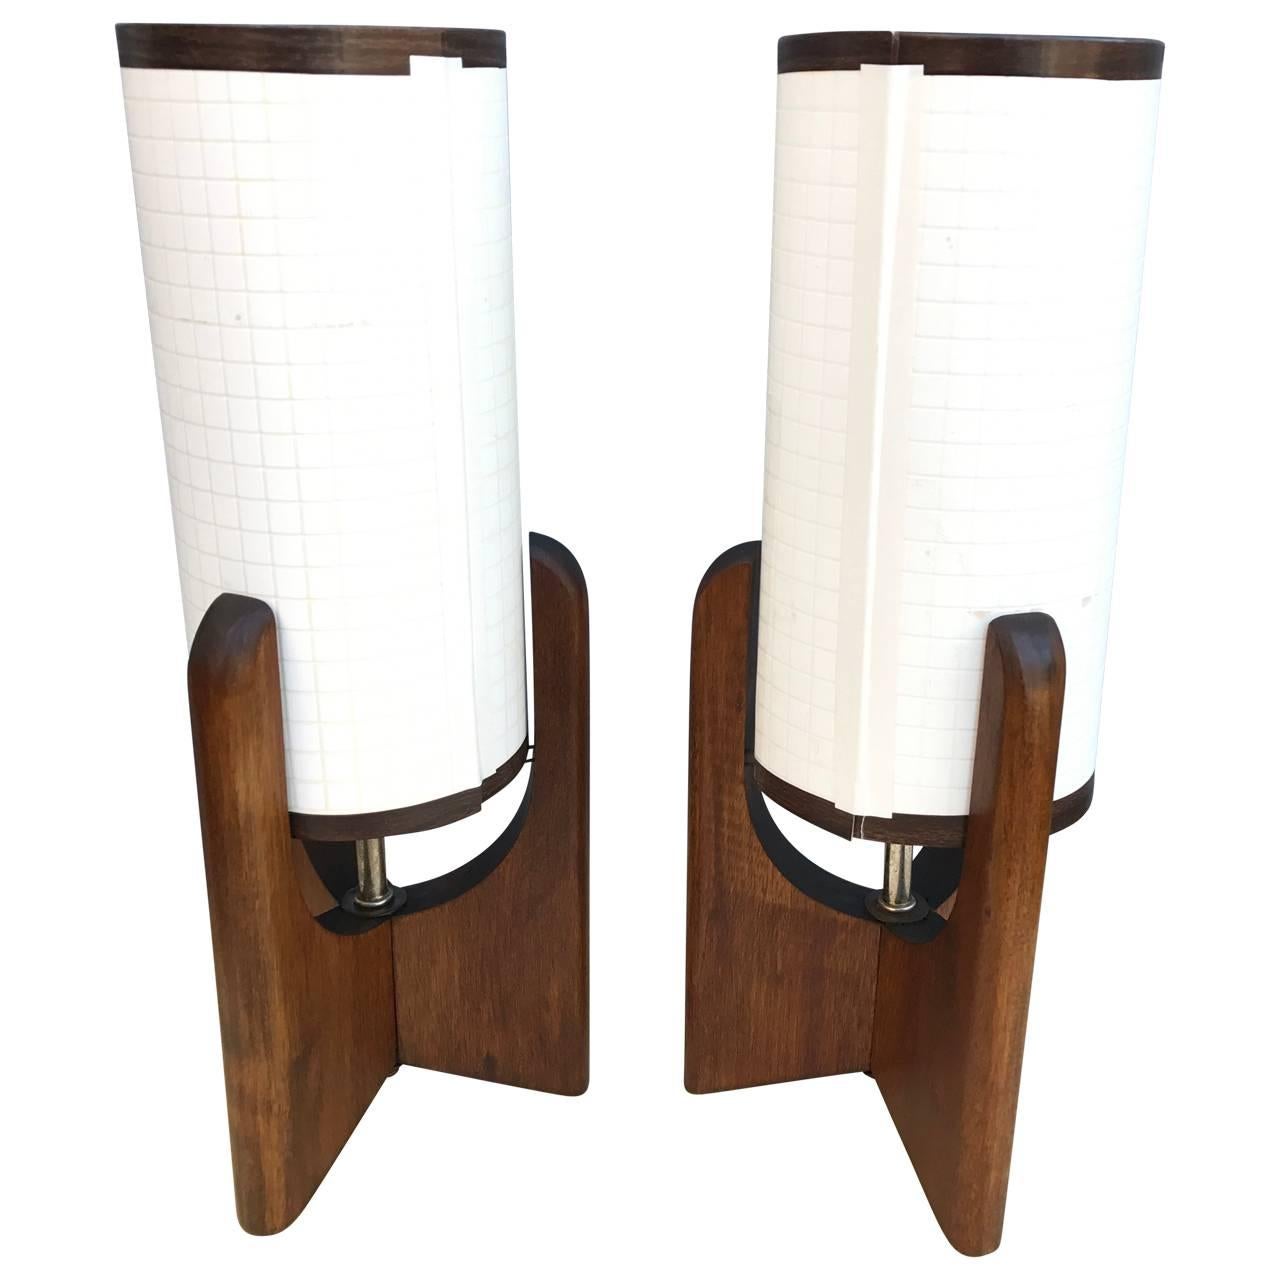 American Pair Of Small Scandinavian Style Mid-Century Modern Bedside Table Lamps